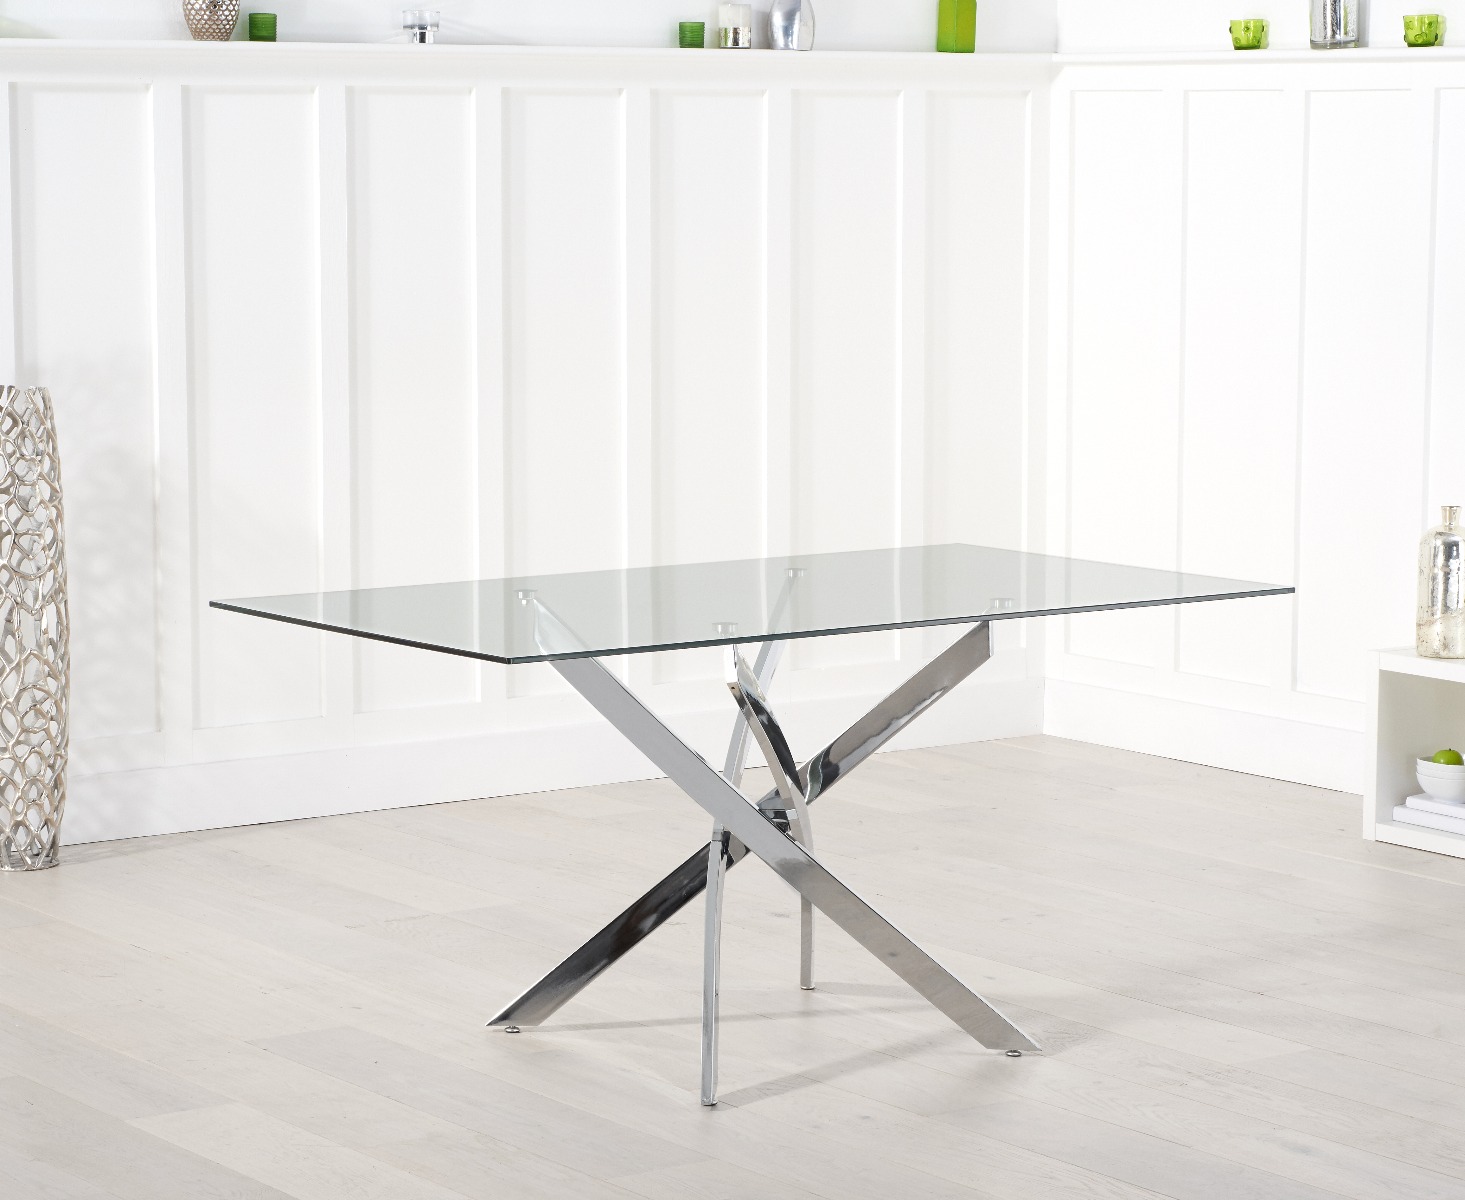 Photo 5 of Denver 160cm glass dining table with 4 grey gianni chairs